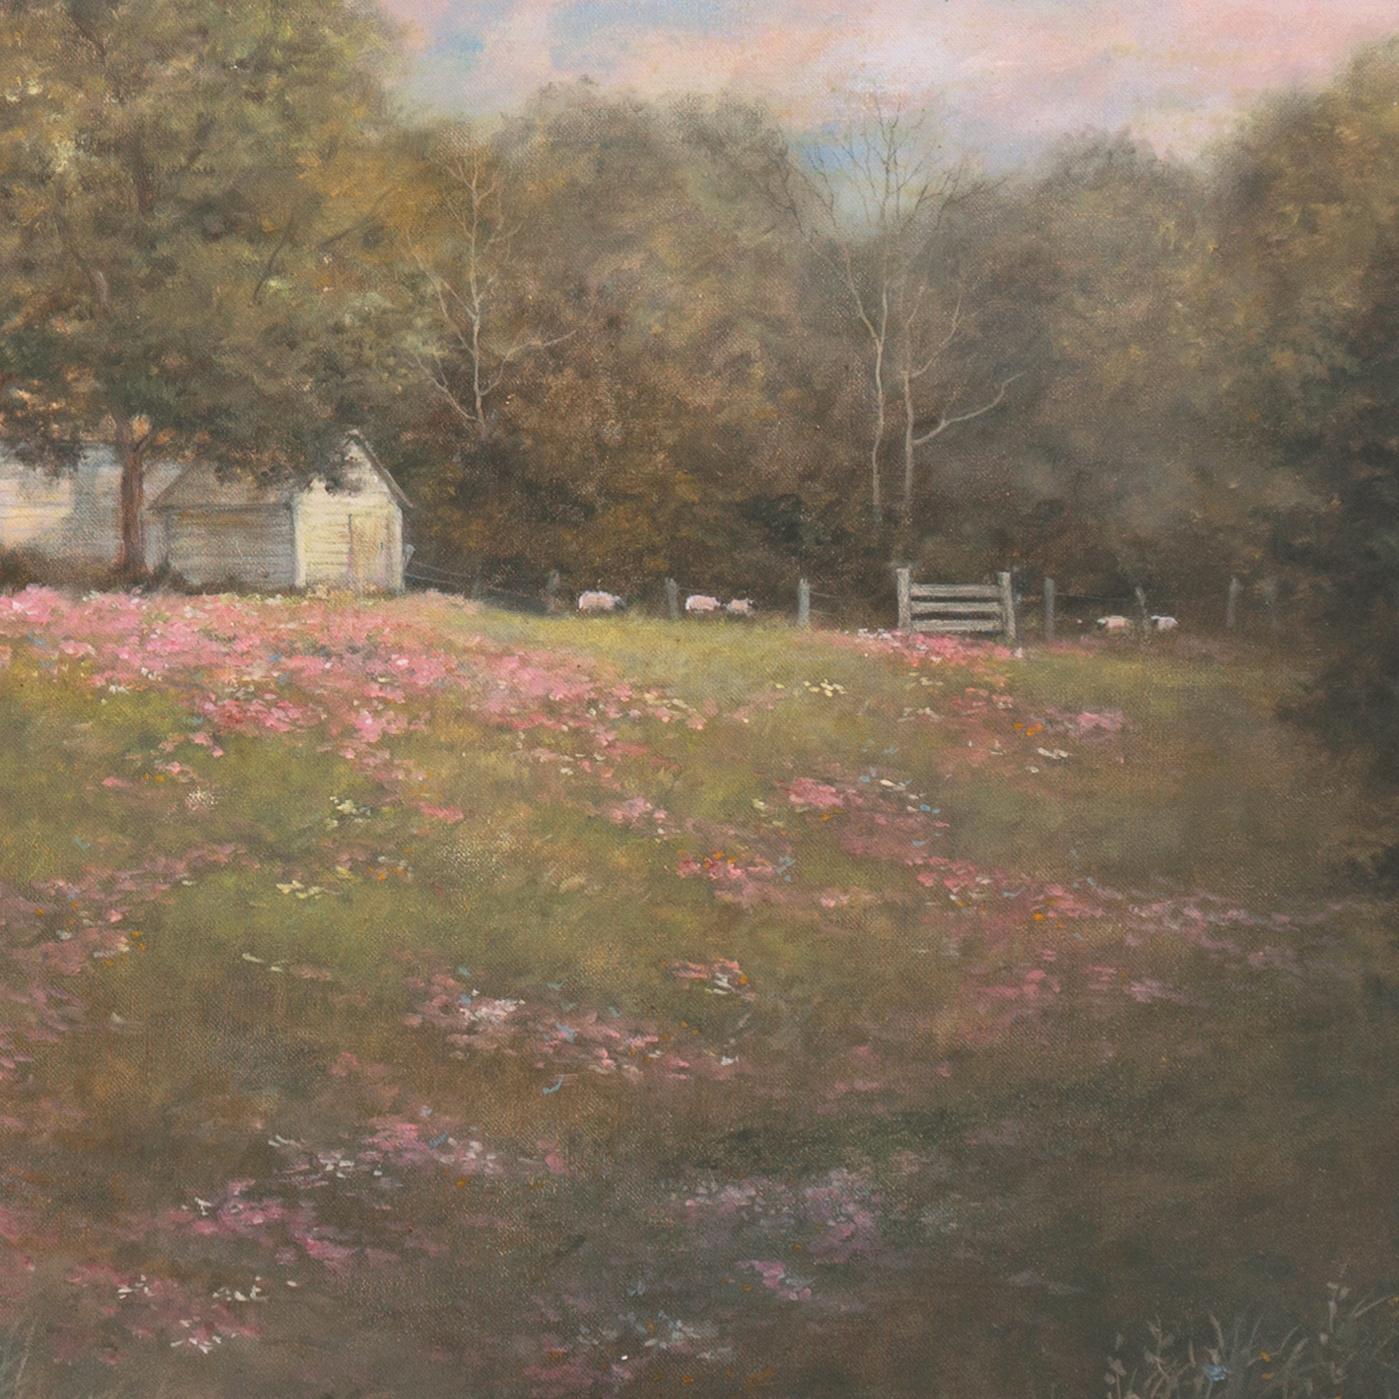 Signed lower right, 'G. Hedlund' for Grace LePage Hedlund (American, 20th century) and painted circa 1995.

An atmospheric, Impressionist oil showing a view of a traditional wooden farmhouse nestled in a grove of trees beyond a meadow with spring